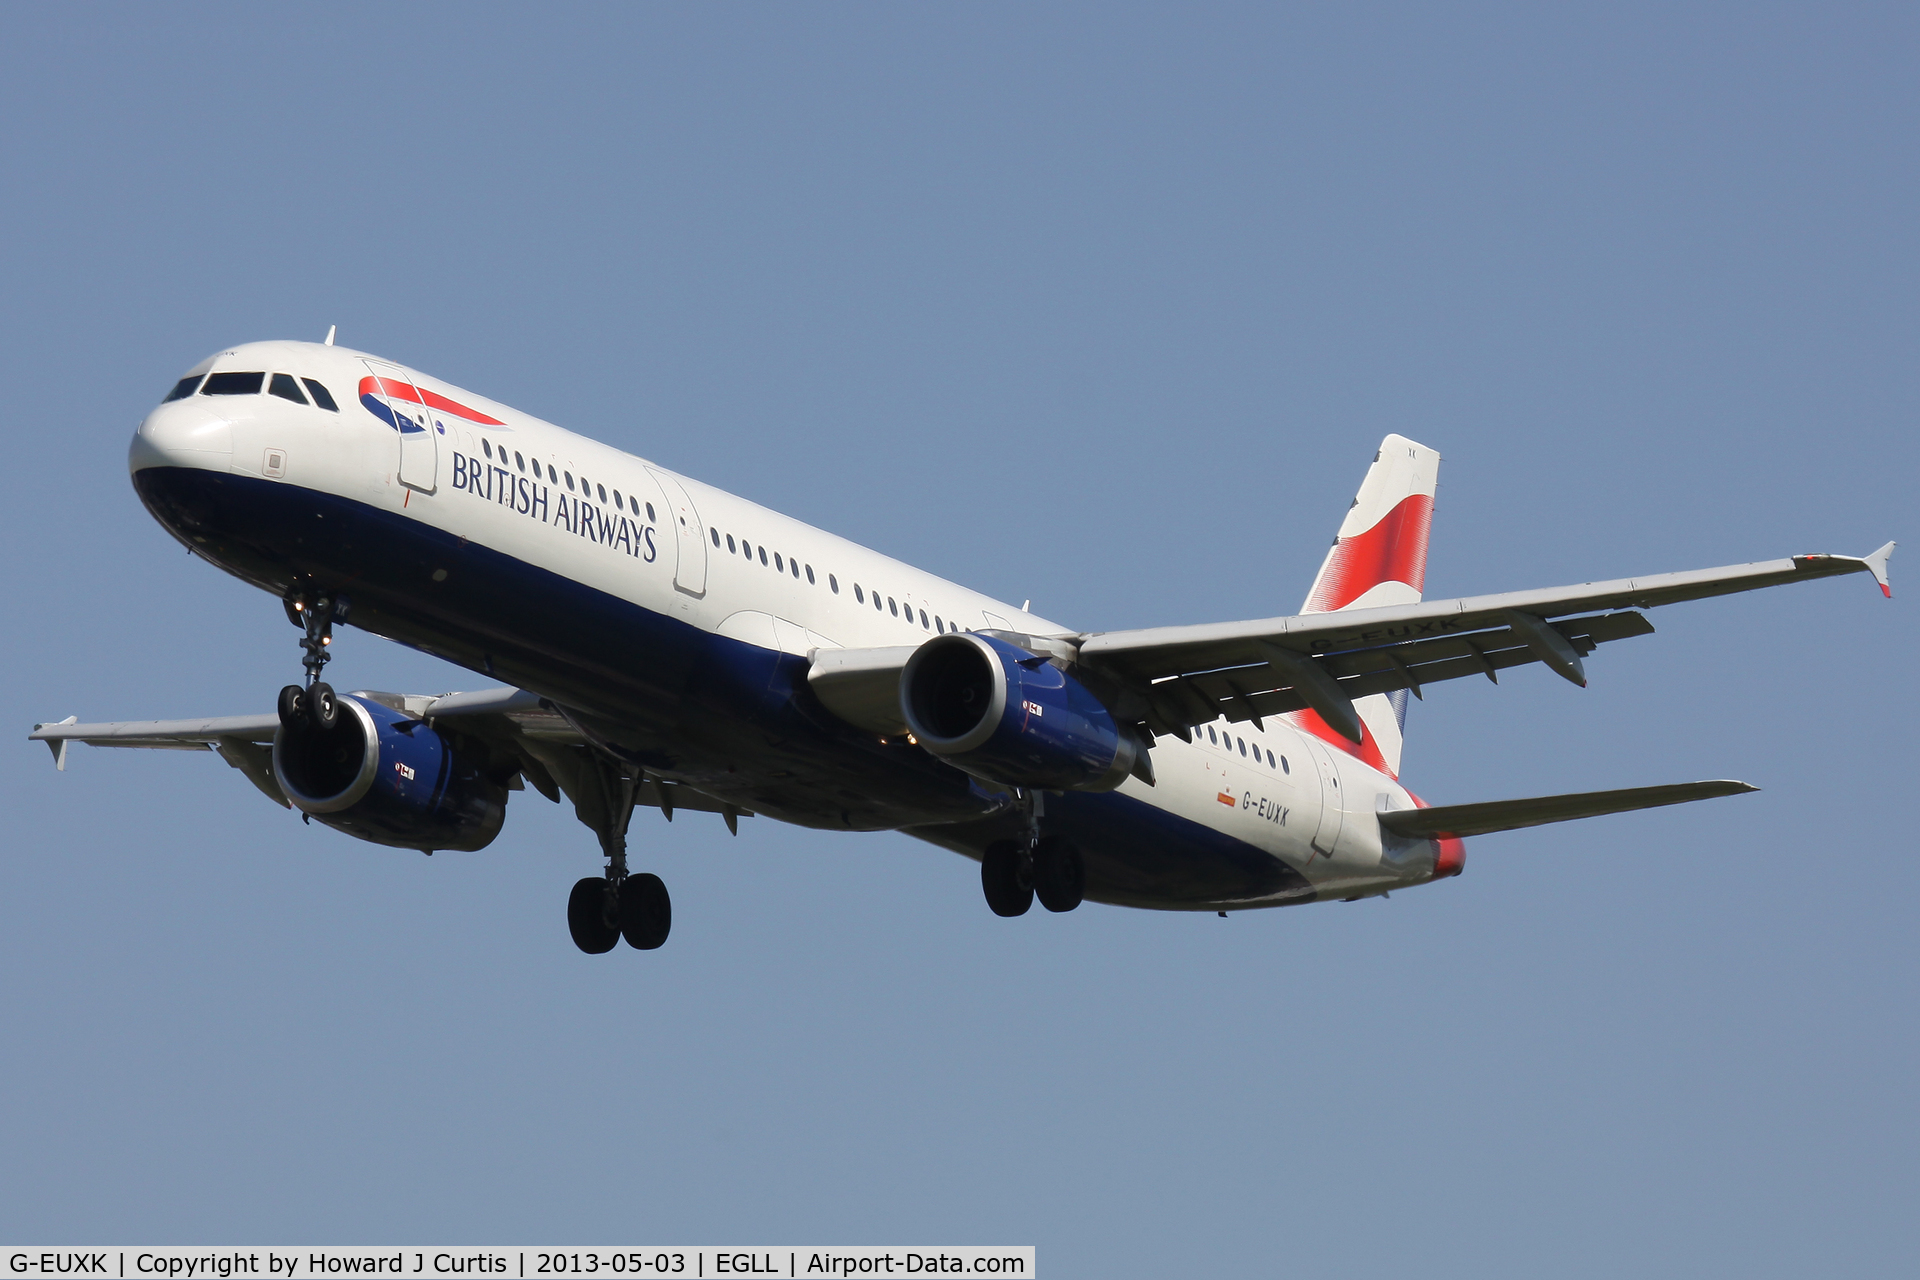 G-EUXK, 2007 Airbus A321-231 C/N 3235, British Airways, on approach to runway 27L.